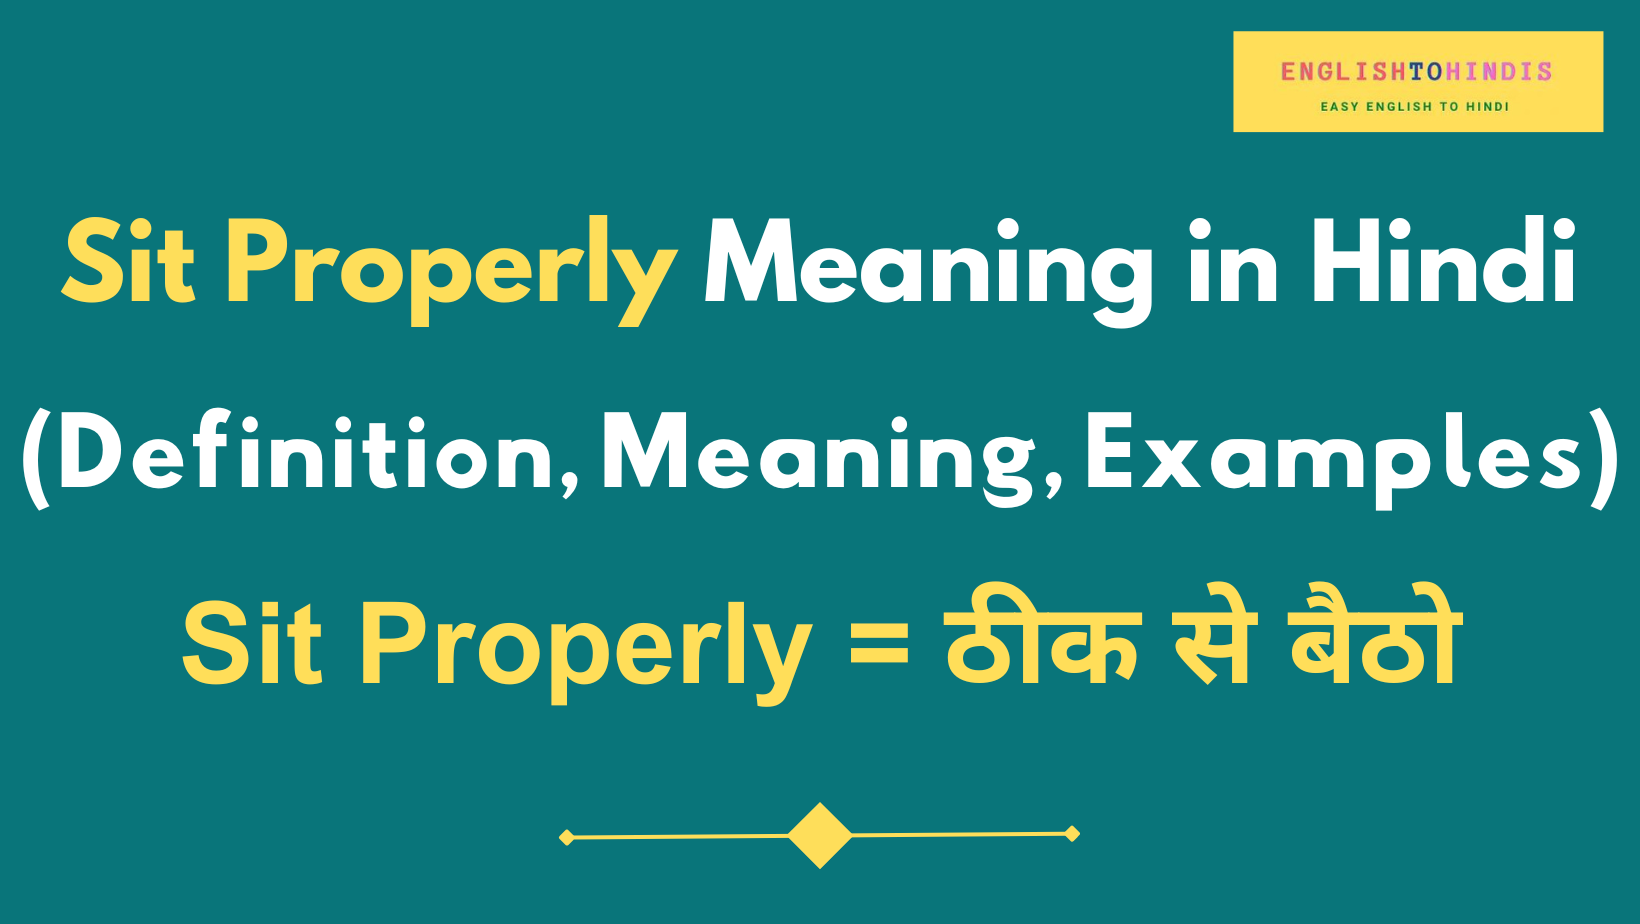 Sit Properly Meaning in Hindi